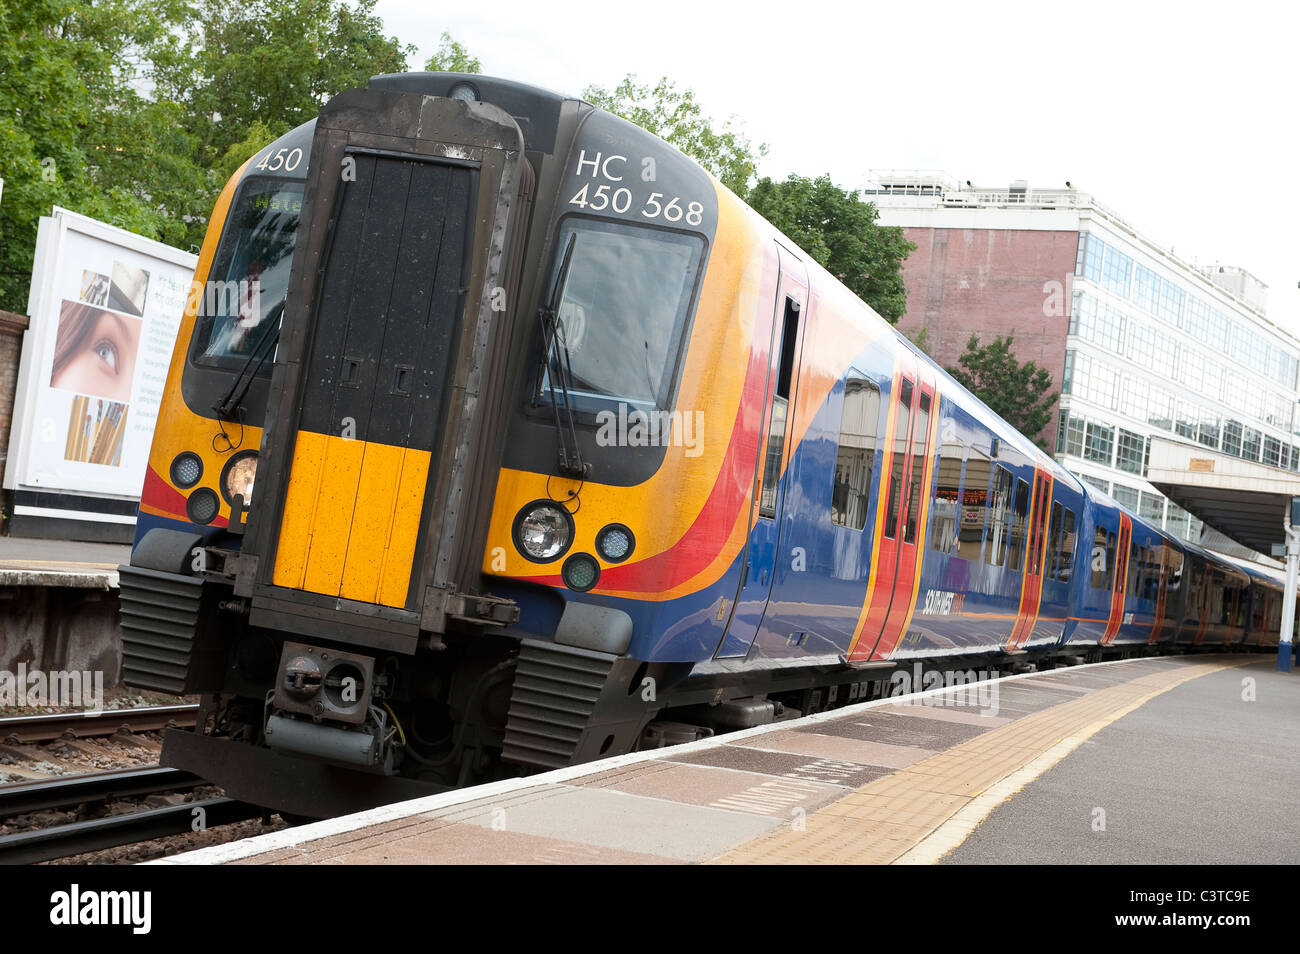 Siemens class 450 desiro train in South West Trains livery waiting at Richmond station platform in England. Stock Photo